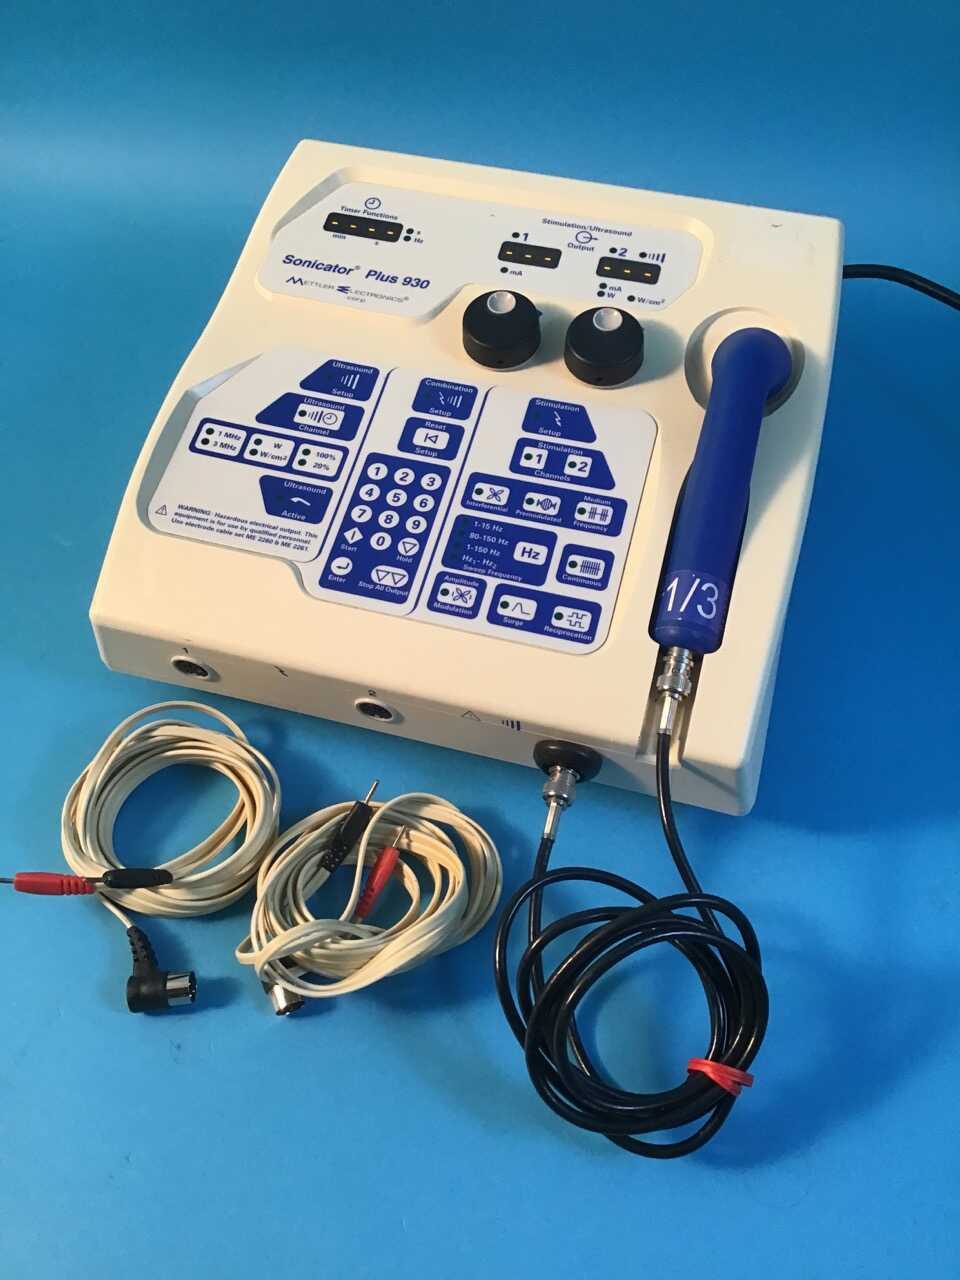 Sonicator Plus 941 Combo Stem and Ultrasound For Sale